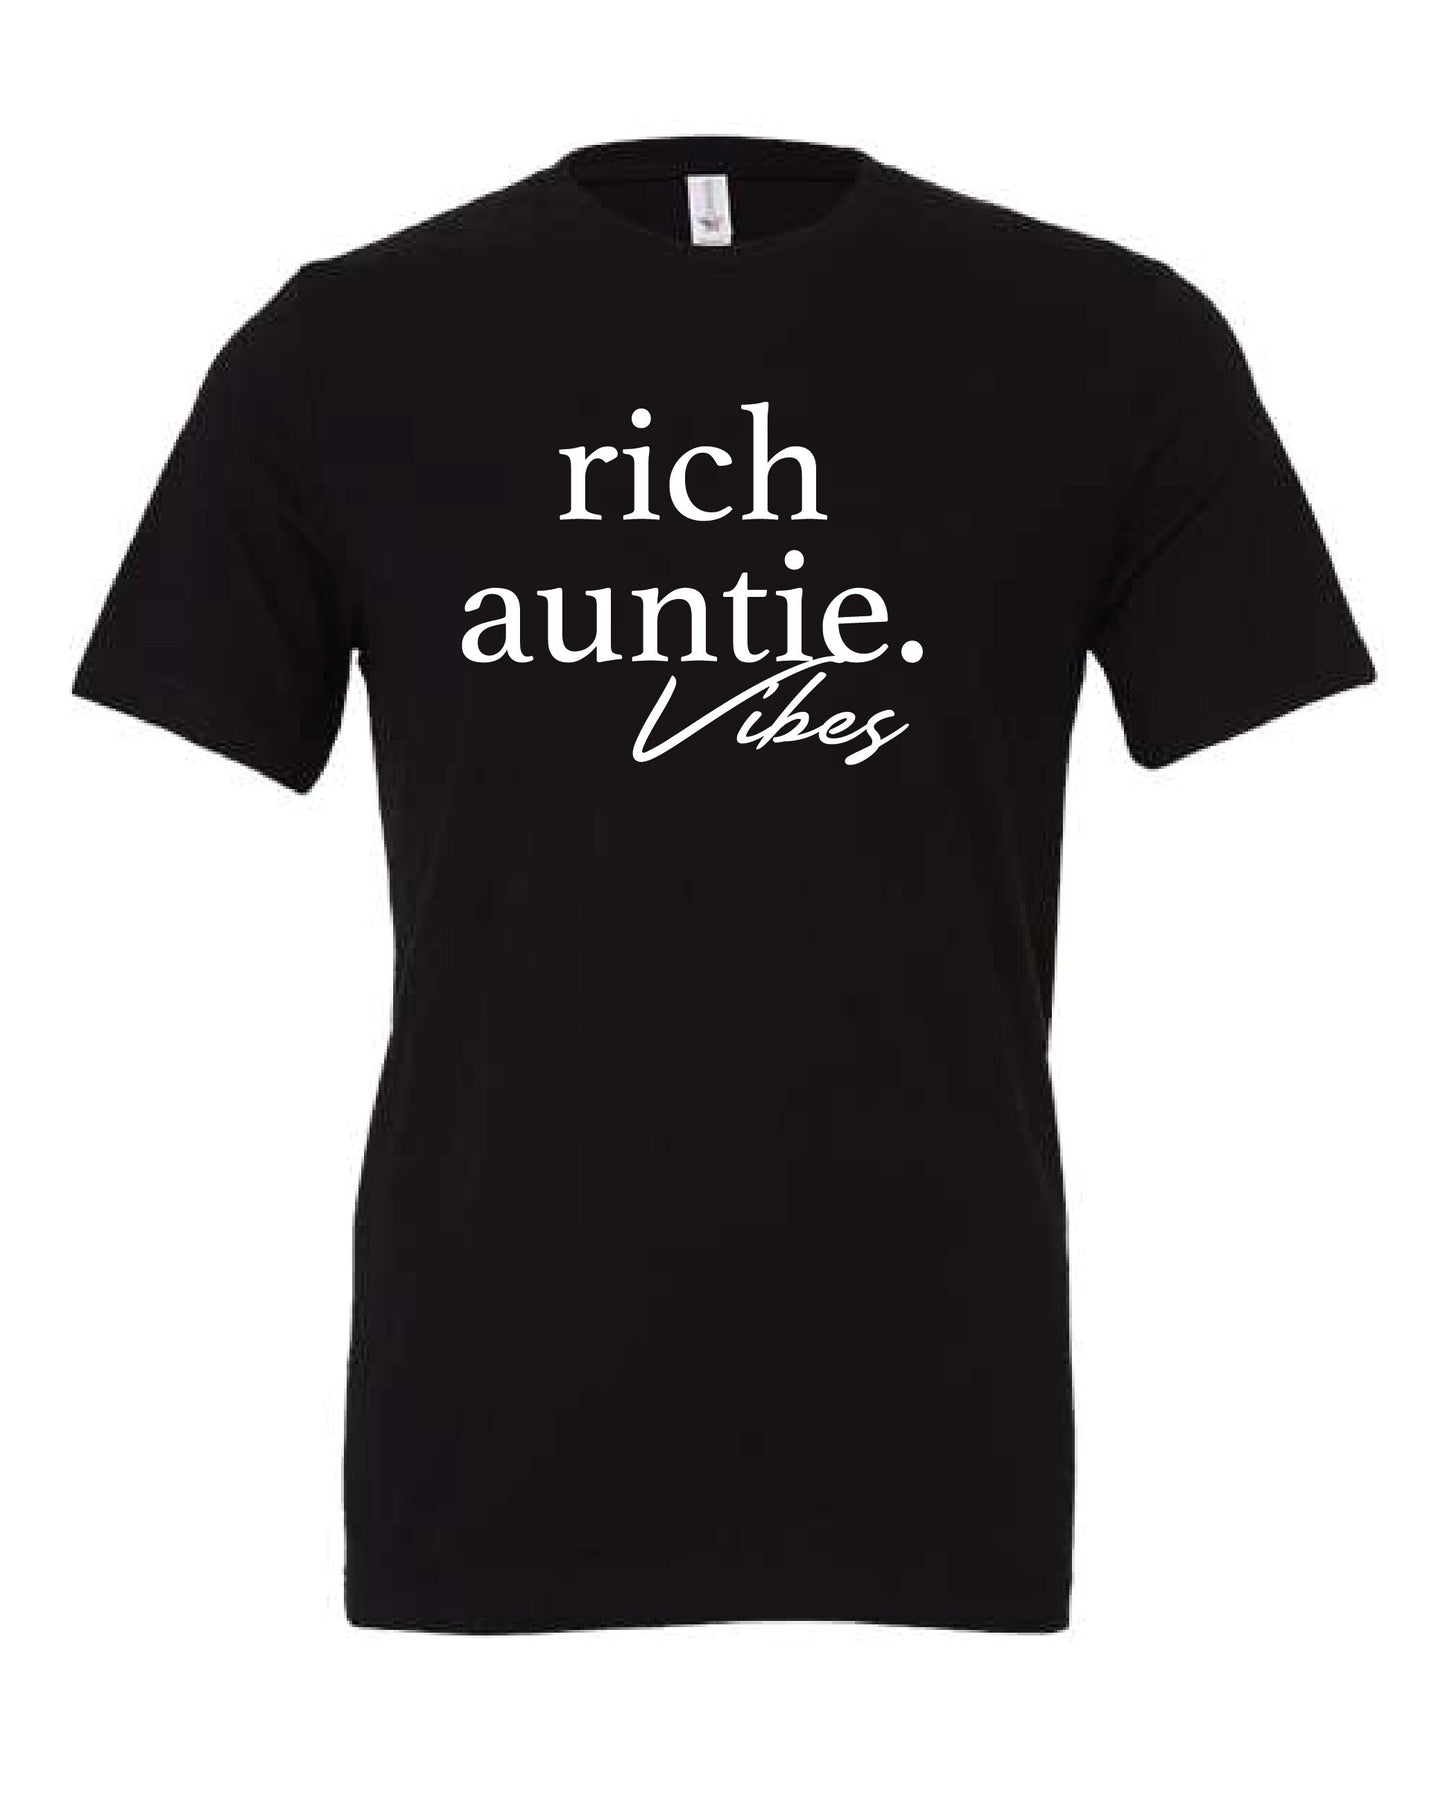 Rich Auntie Vibes T-shirt | Auntie T-shirt | Rich Auntie Gift | Rich Auntie Club | Rich Aunts Worldwide | Rich Aunt Christmas Gift